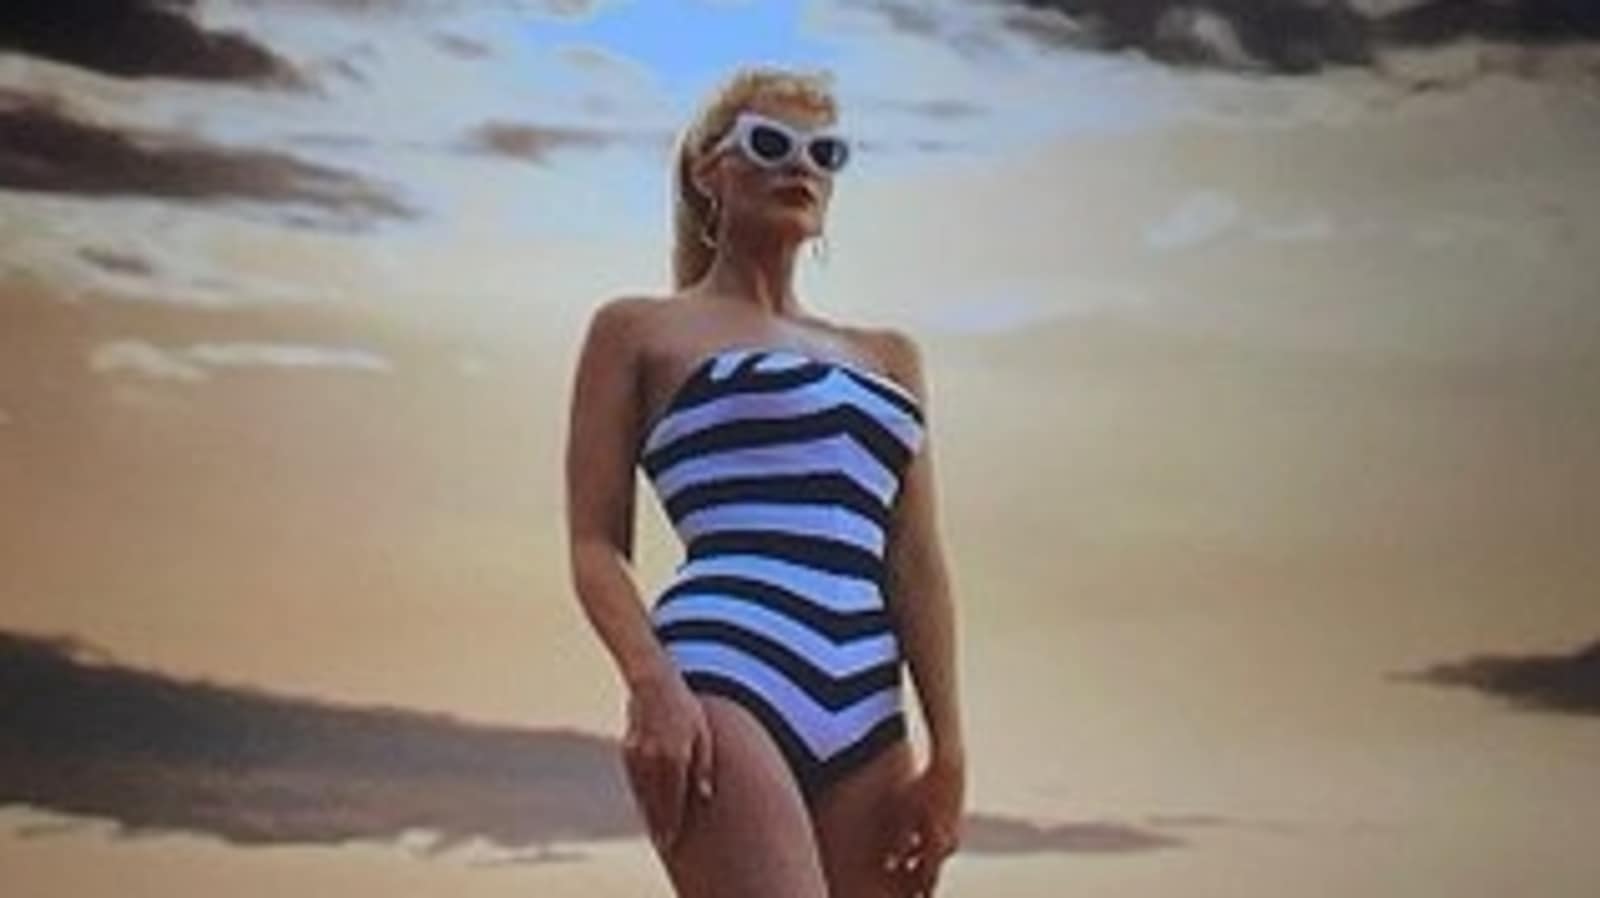 Margot Robbie puts spin on Barbie's iconic 1959 striped swimsuit